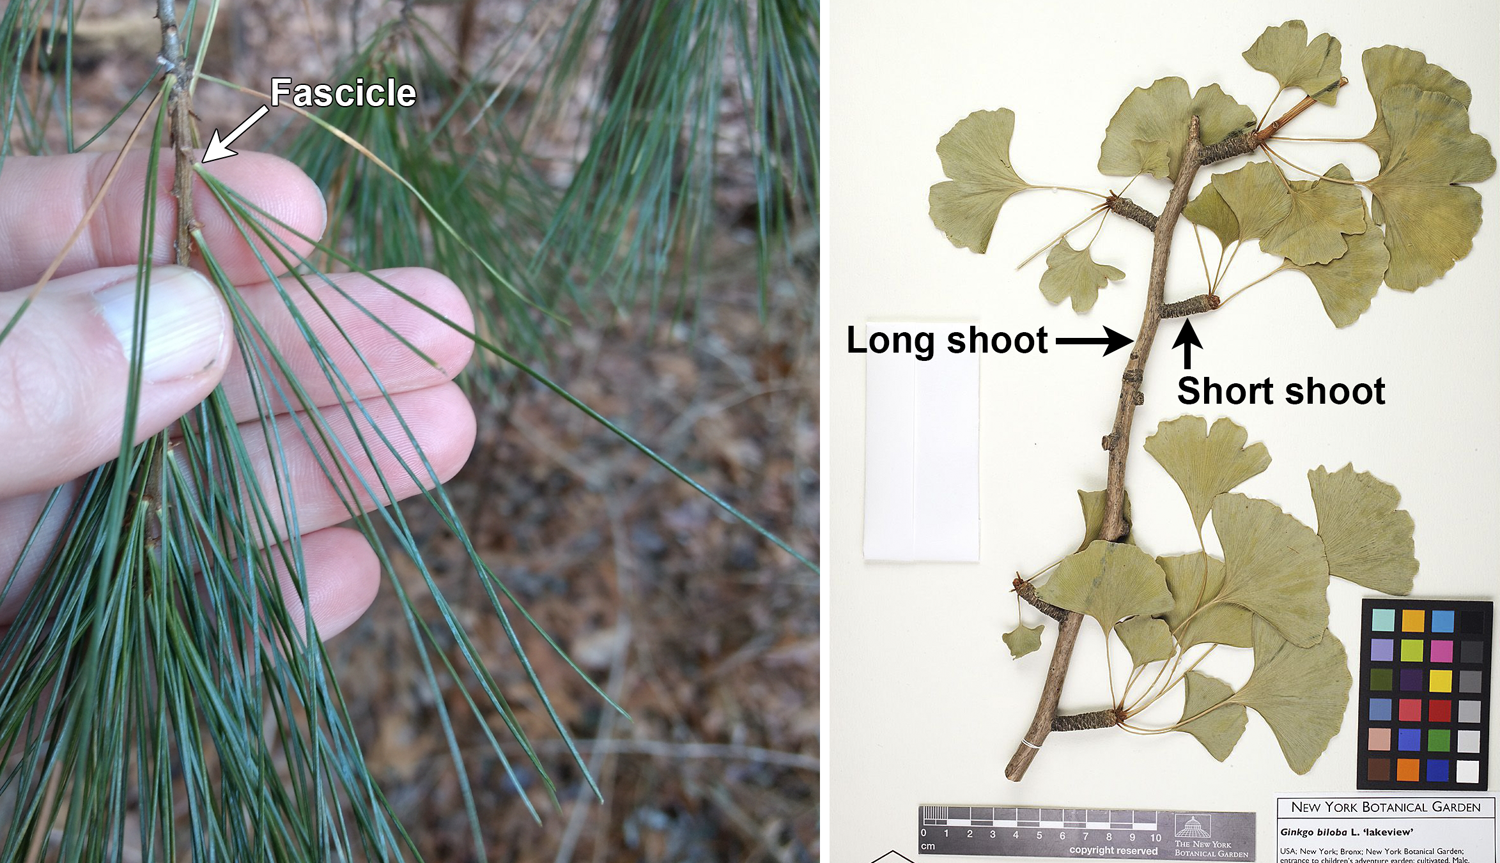 2-Panel figure. Panel 1: Close-up of white pine branch showing 5-needle fascicles. Panel 2: Herbarium sheet of ginkgo branch showing long shoot bearing short shoots with fascicled leaves.